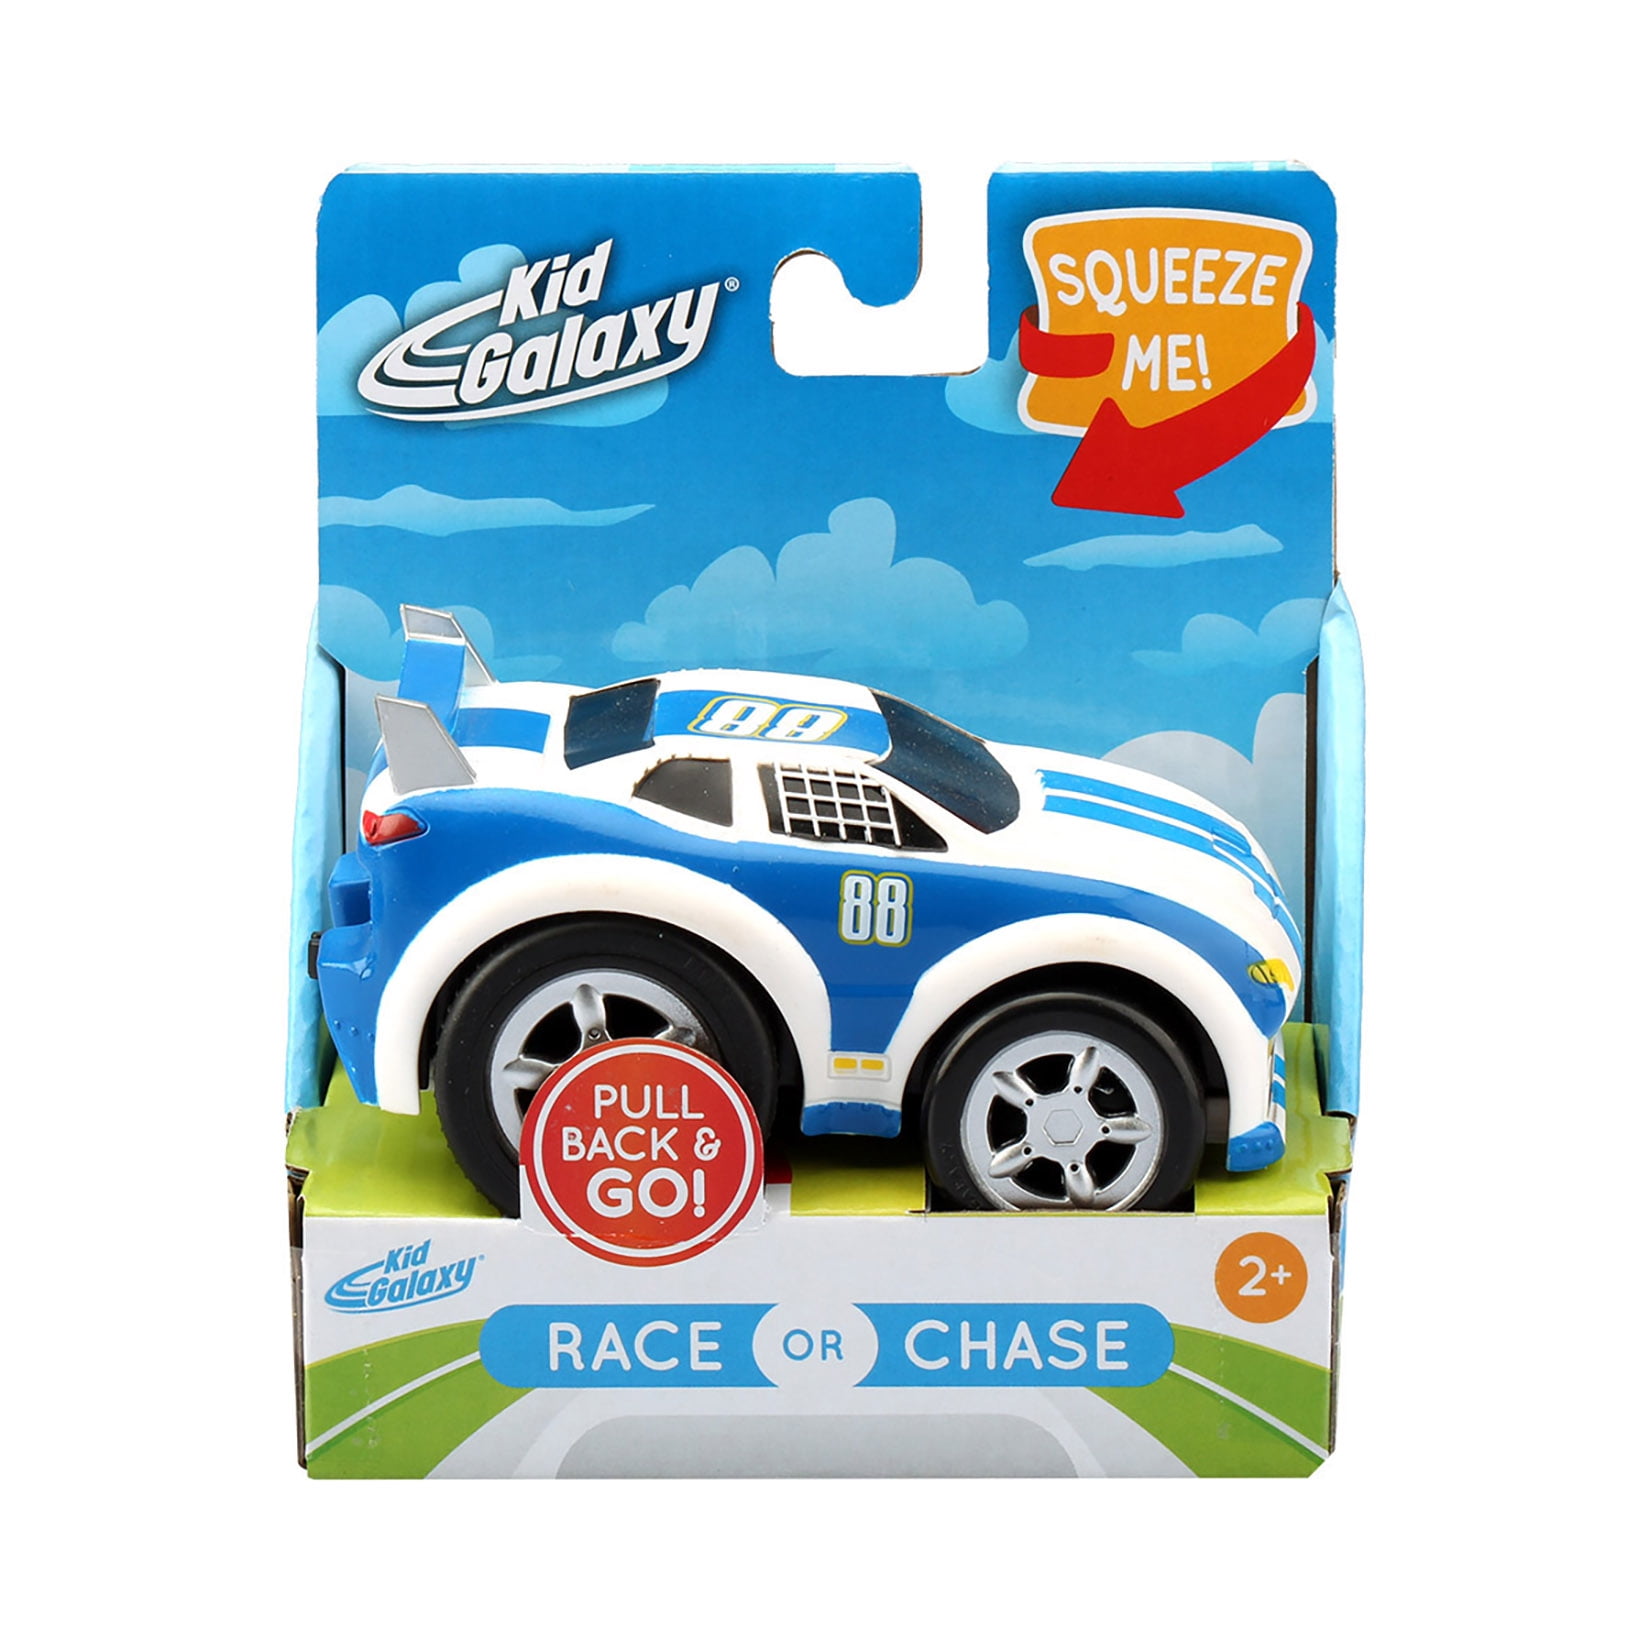 Kid Galaxy Squeeze Me Race or Chase 5 Pack Vehicle 